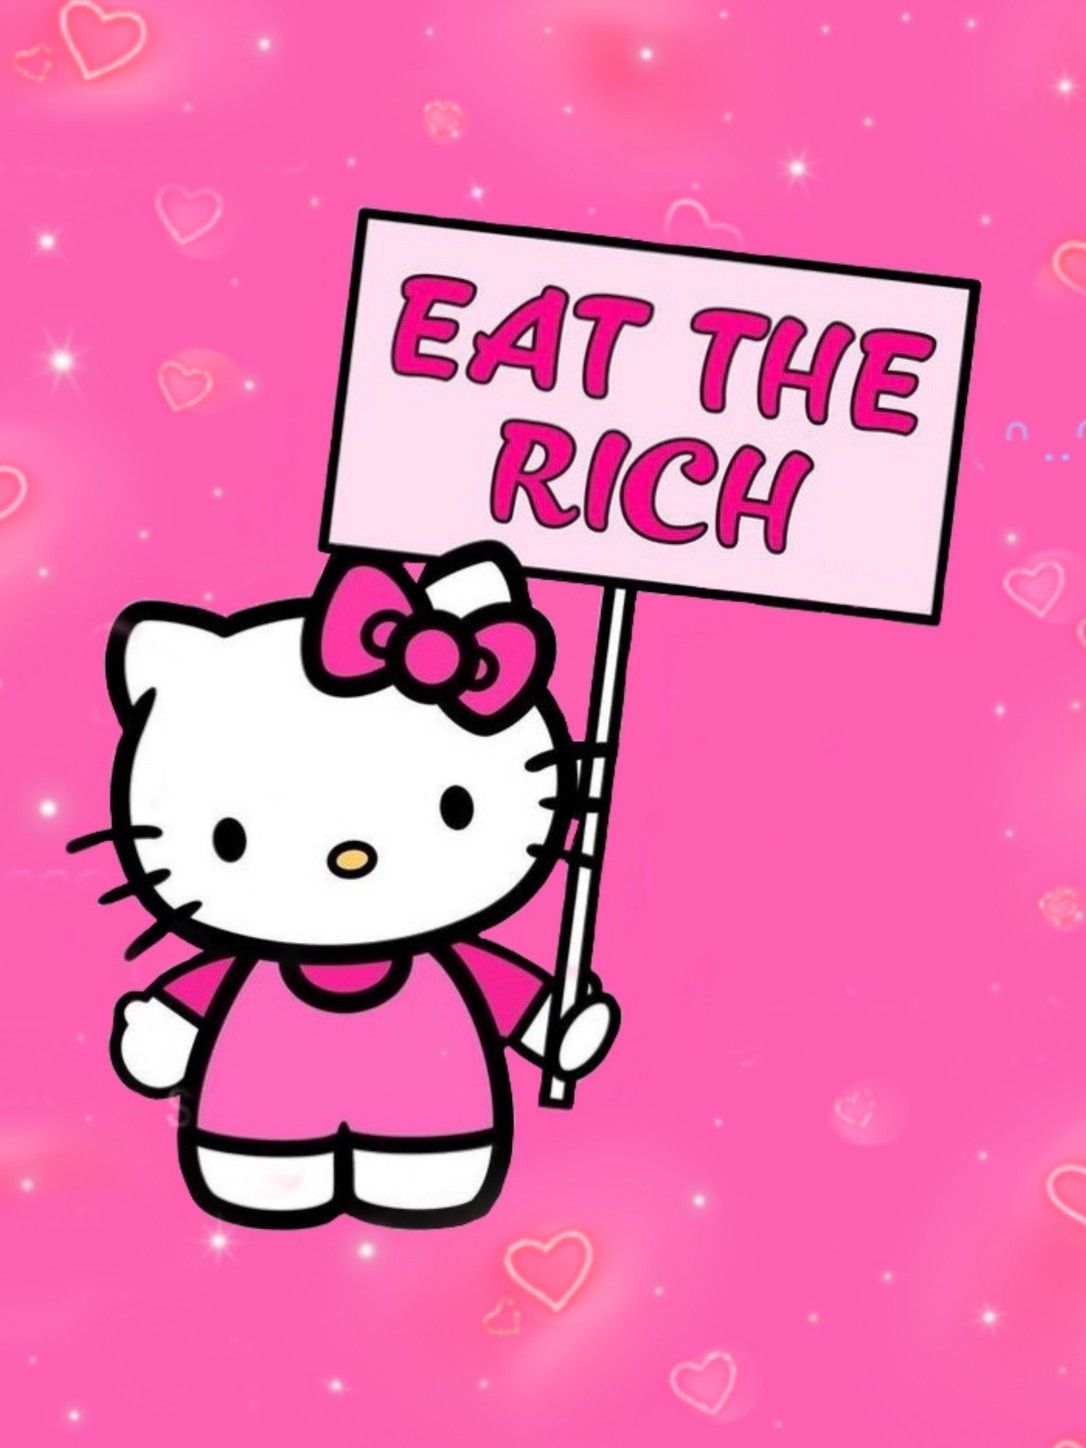 Y2K Hello Kitty Wallpapers - Wallpaper Cave